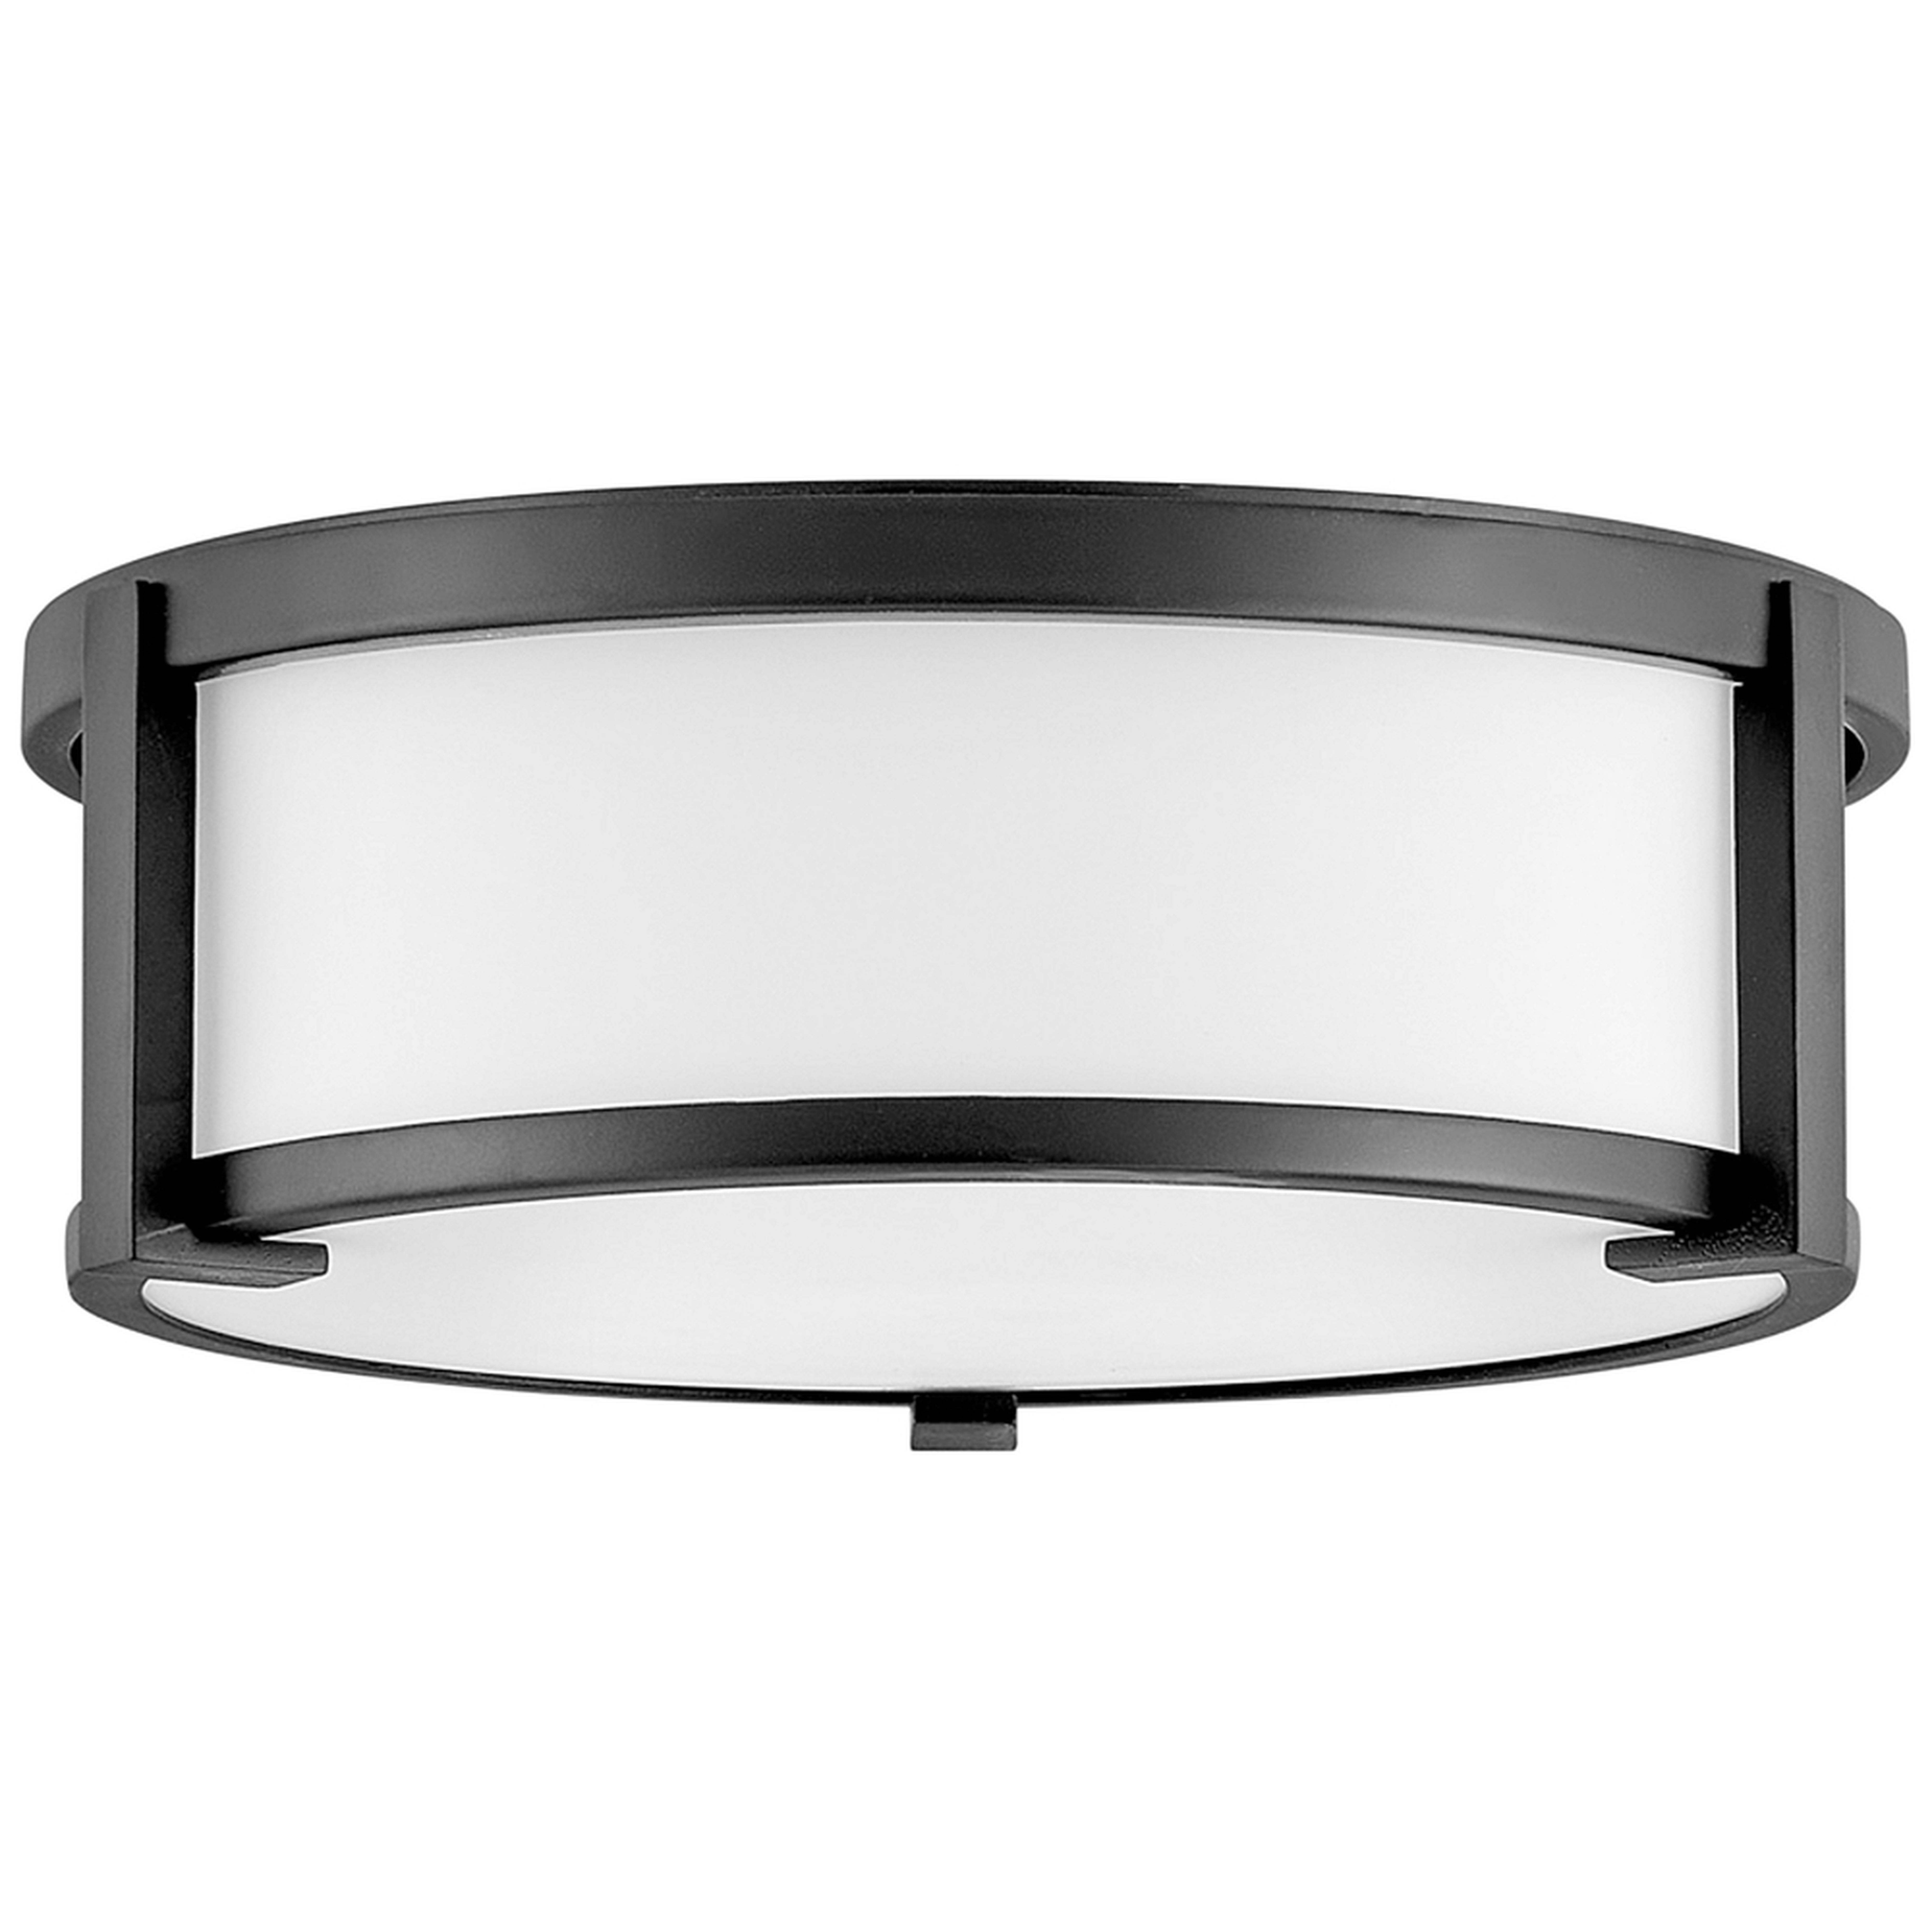 Hinkley Lowell 13 1/4" Wide Black Drum Ceiling Light - Style # 98F83 - Lamps Plus